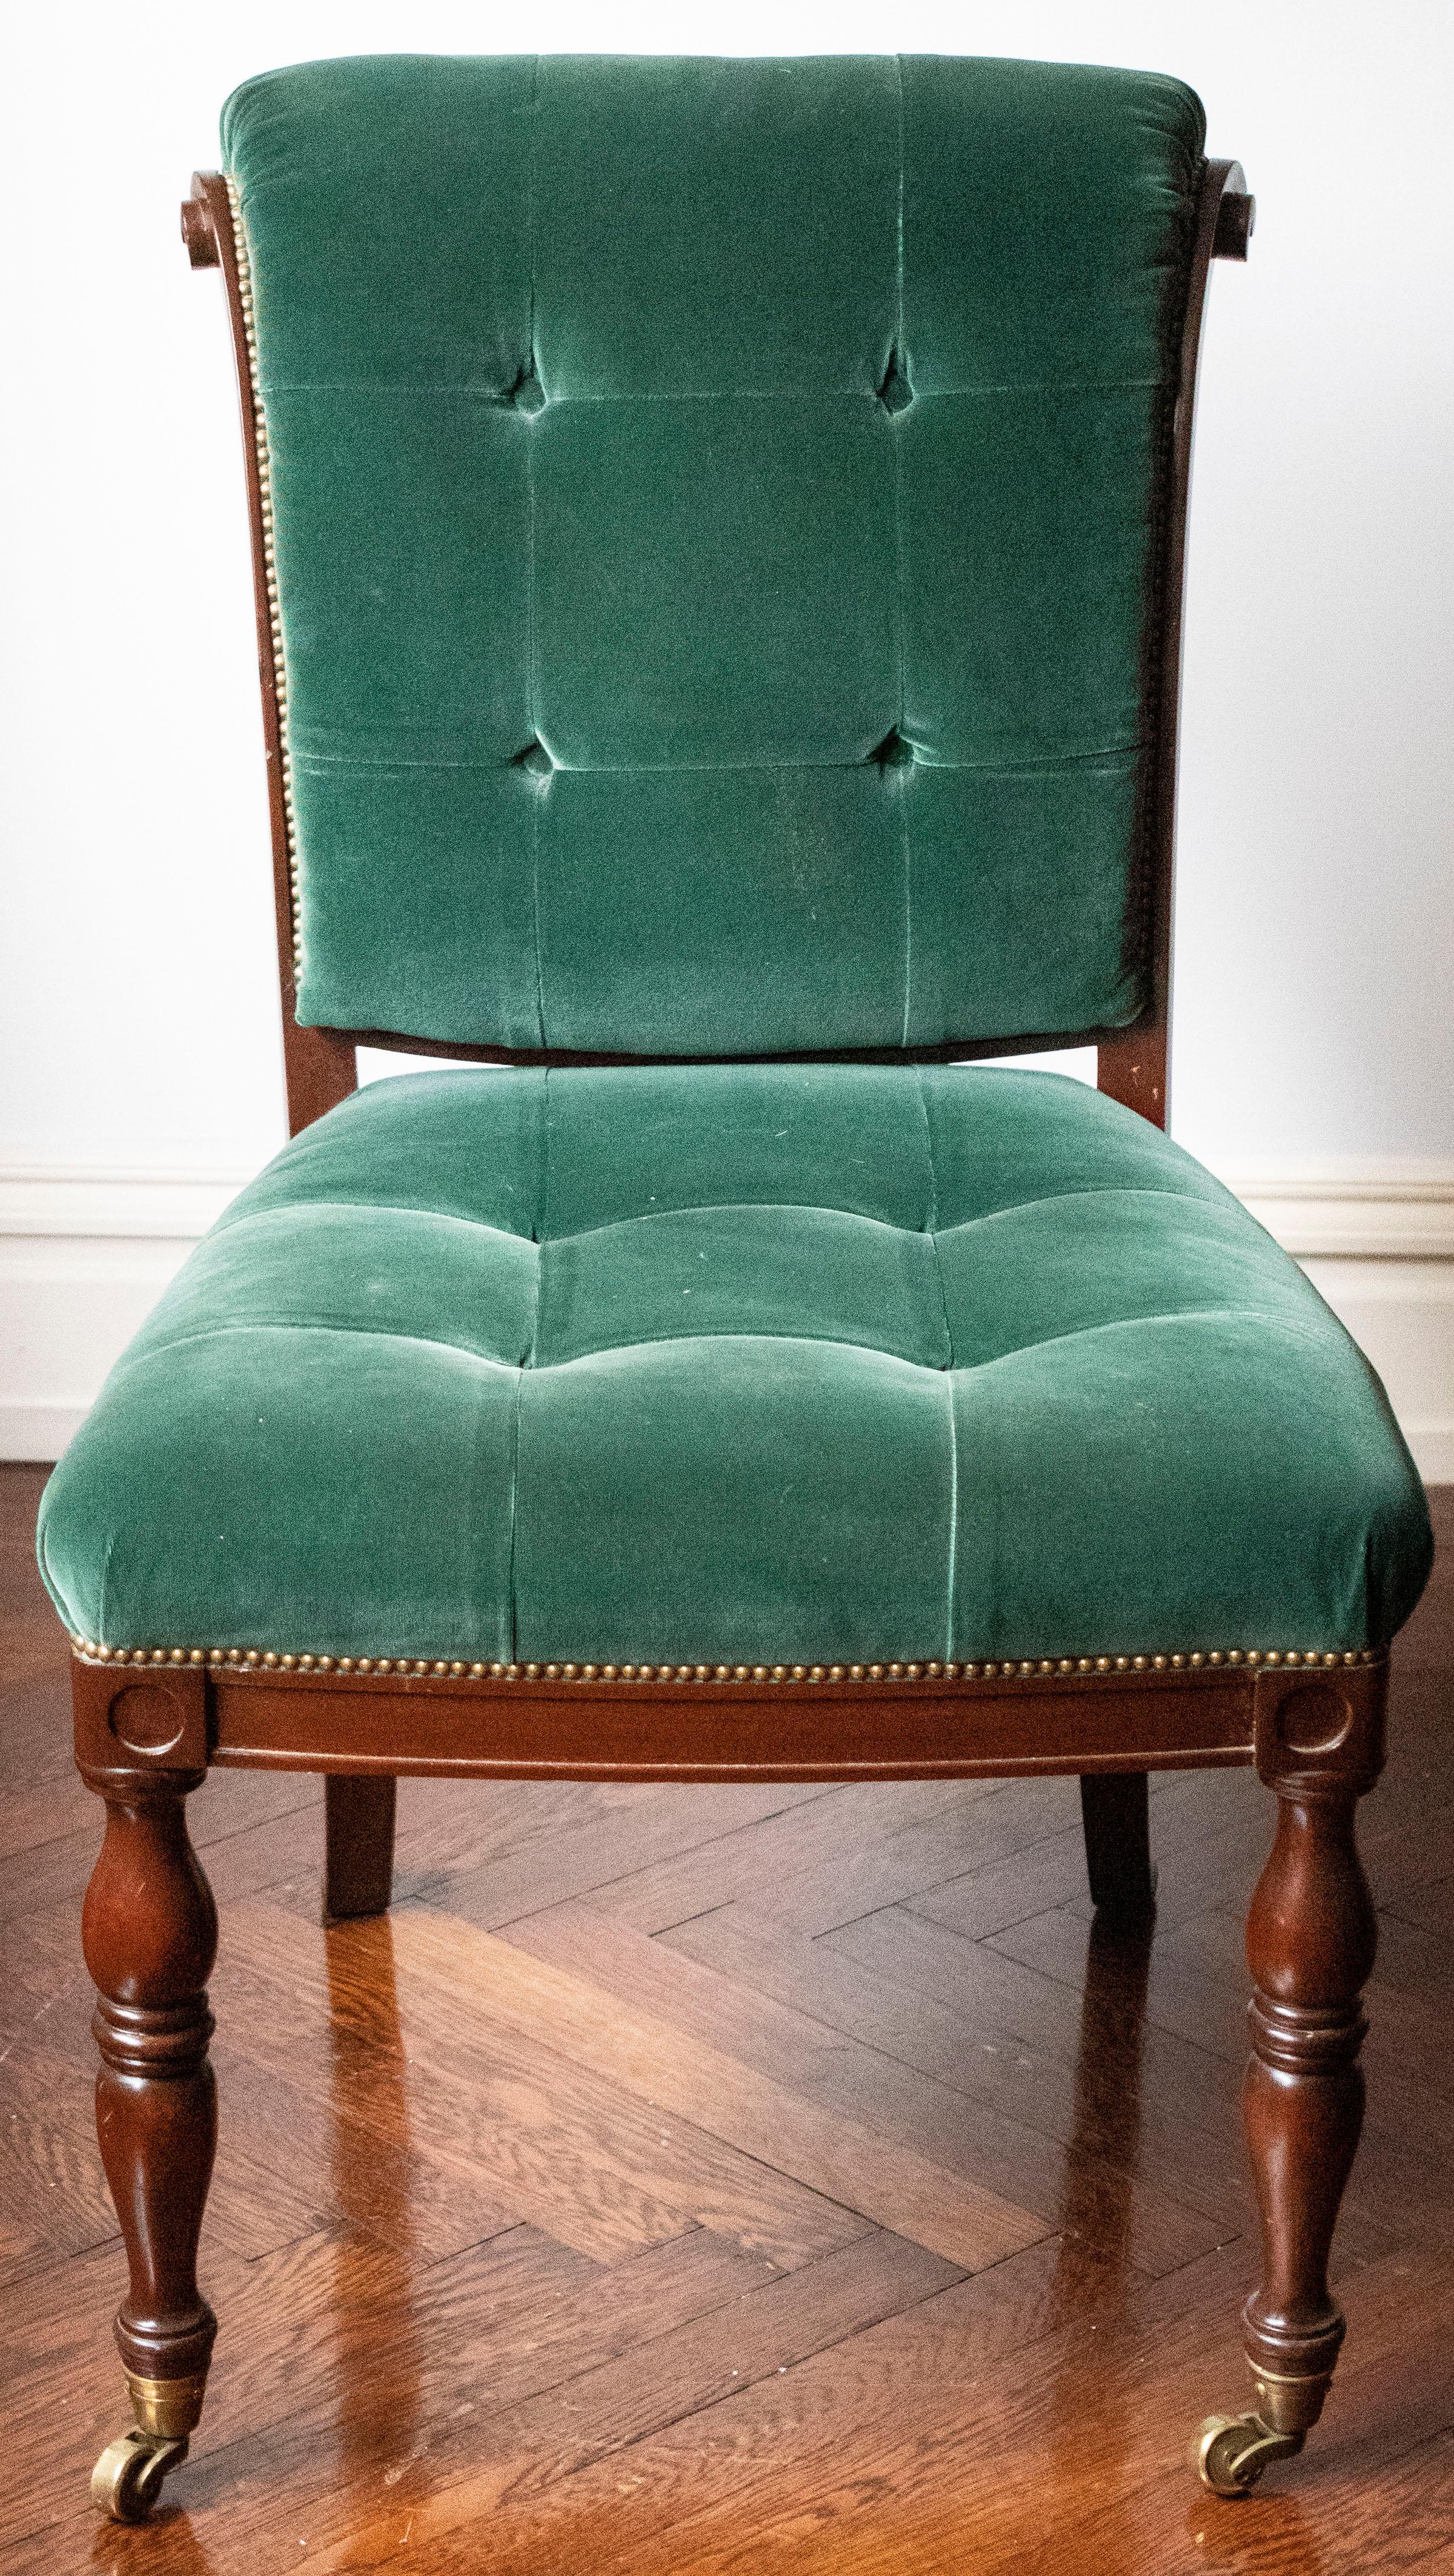 English Regency style library or side chair with tufted green velvet upholstery. 36